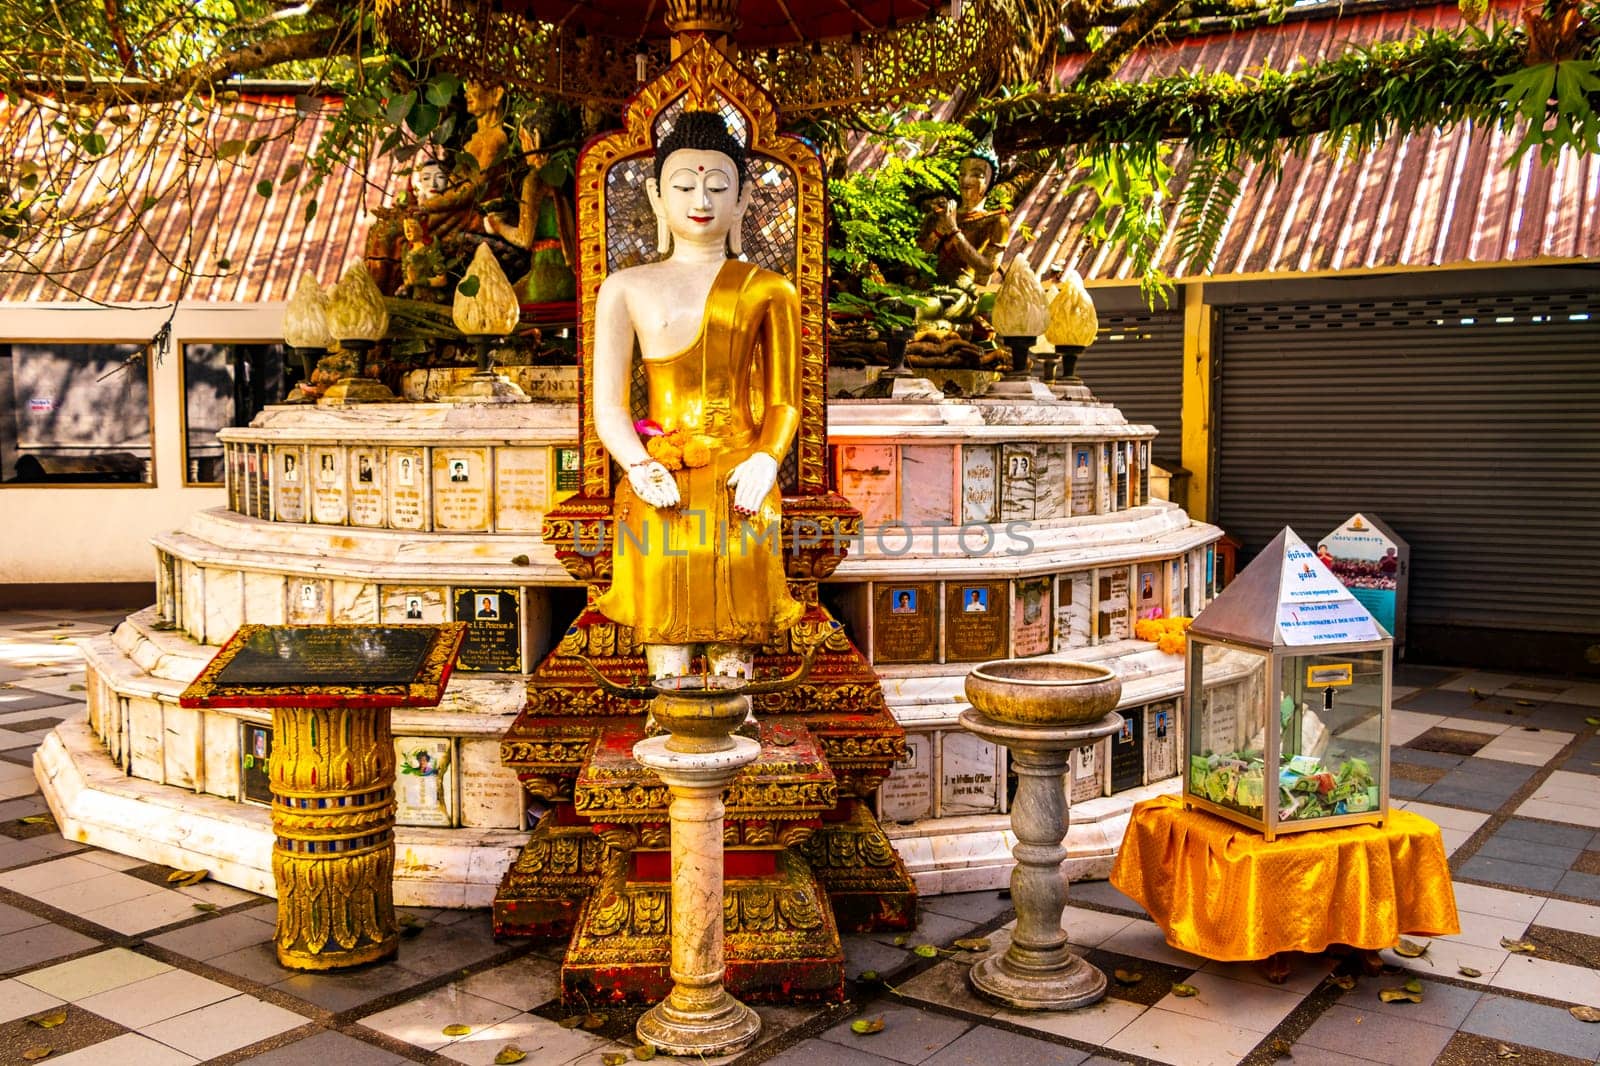 Buddha sculture figure statue at golden gold Wat Phra That Doi Suthep temple temples building in Chiang Mai Amphoe Mueang Chiang Mai Thailand in Southeastasia Asia.